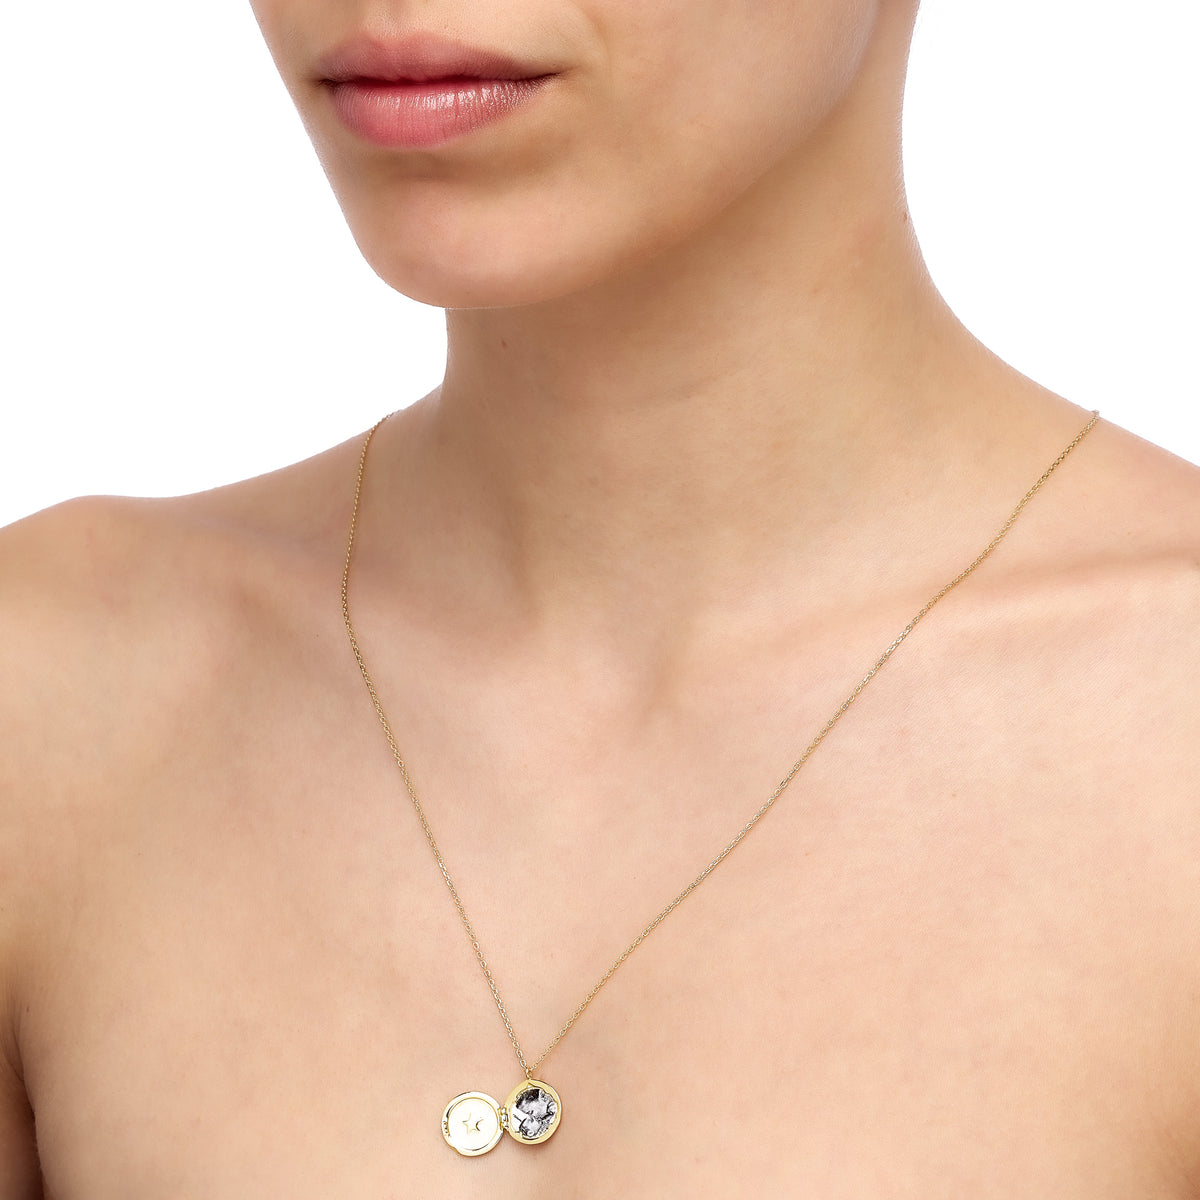 Mellonia | Pernambuco Necklace | White CZ | Gold Plated 925 Silver